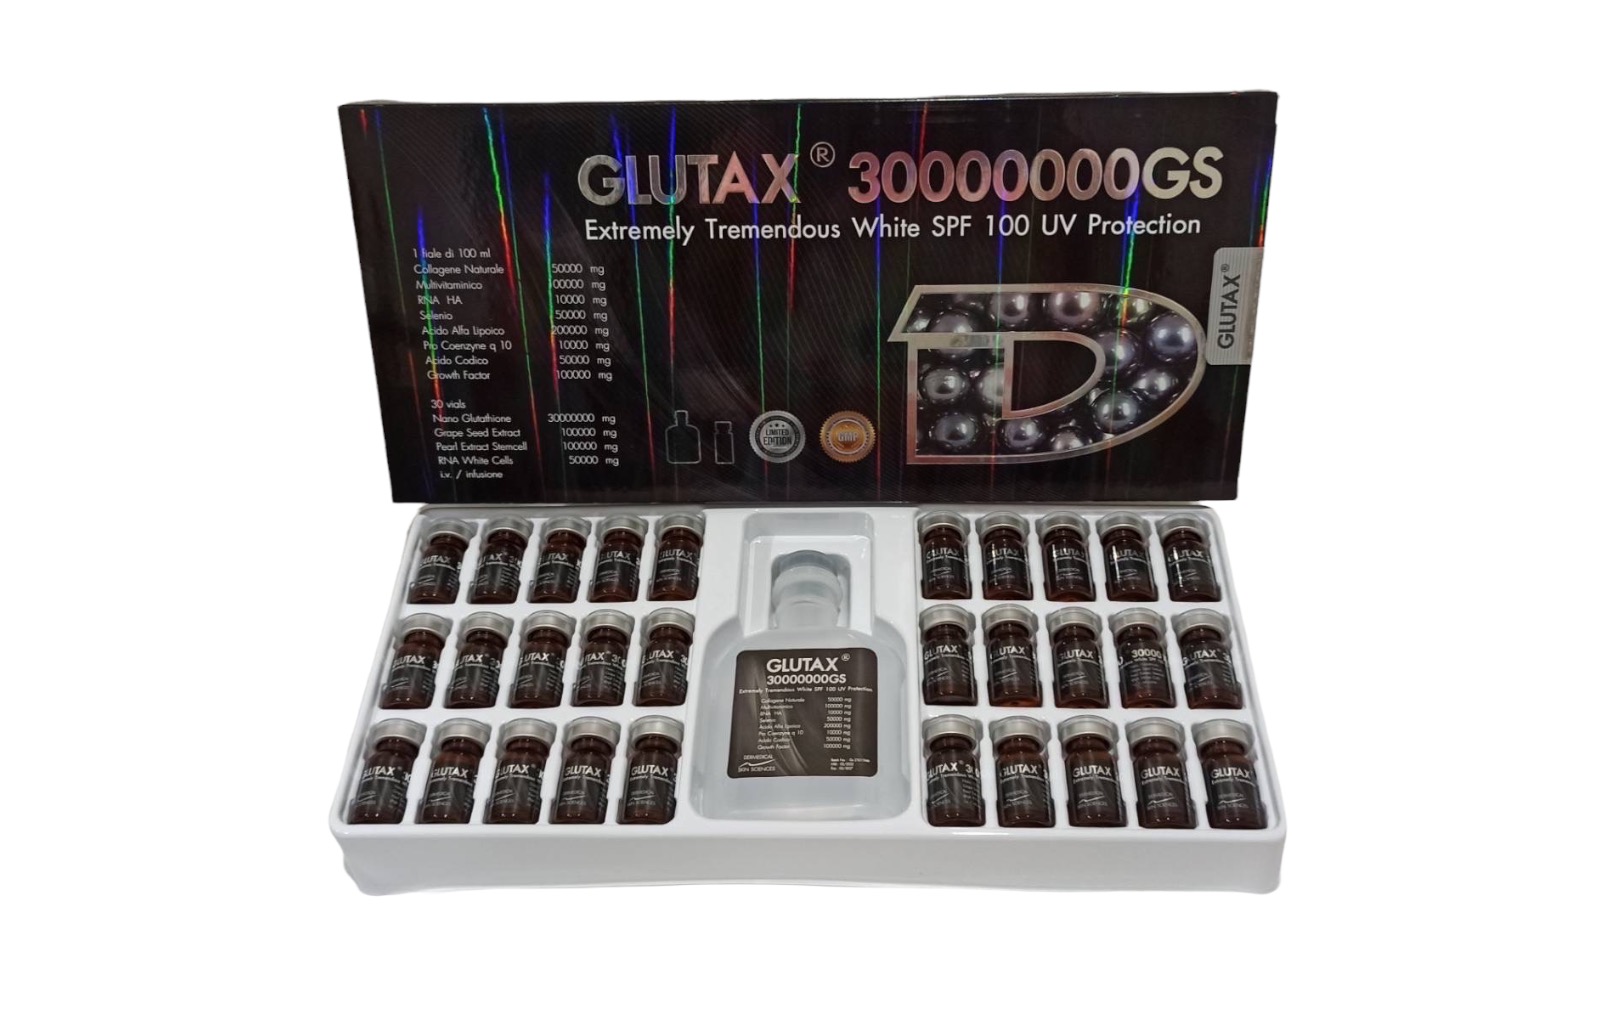 Glutax 30,000,000Gs Extremely Tremendous White SPF 100 UV Protection